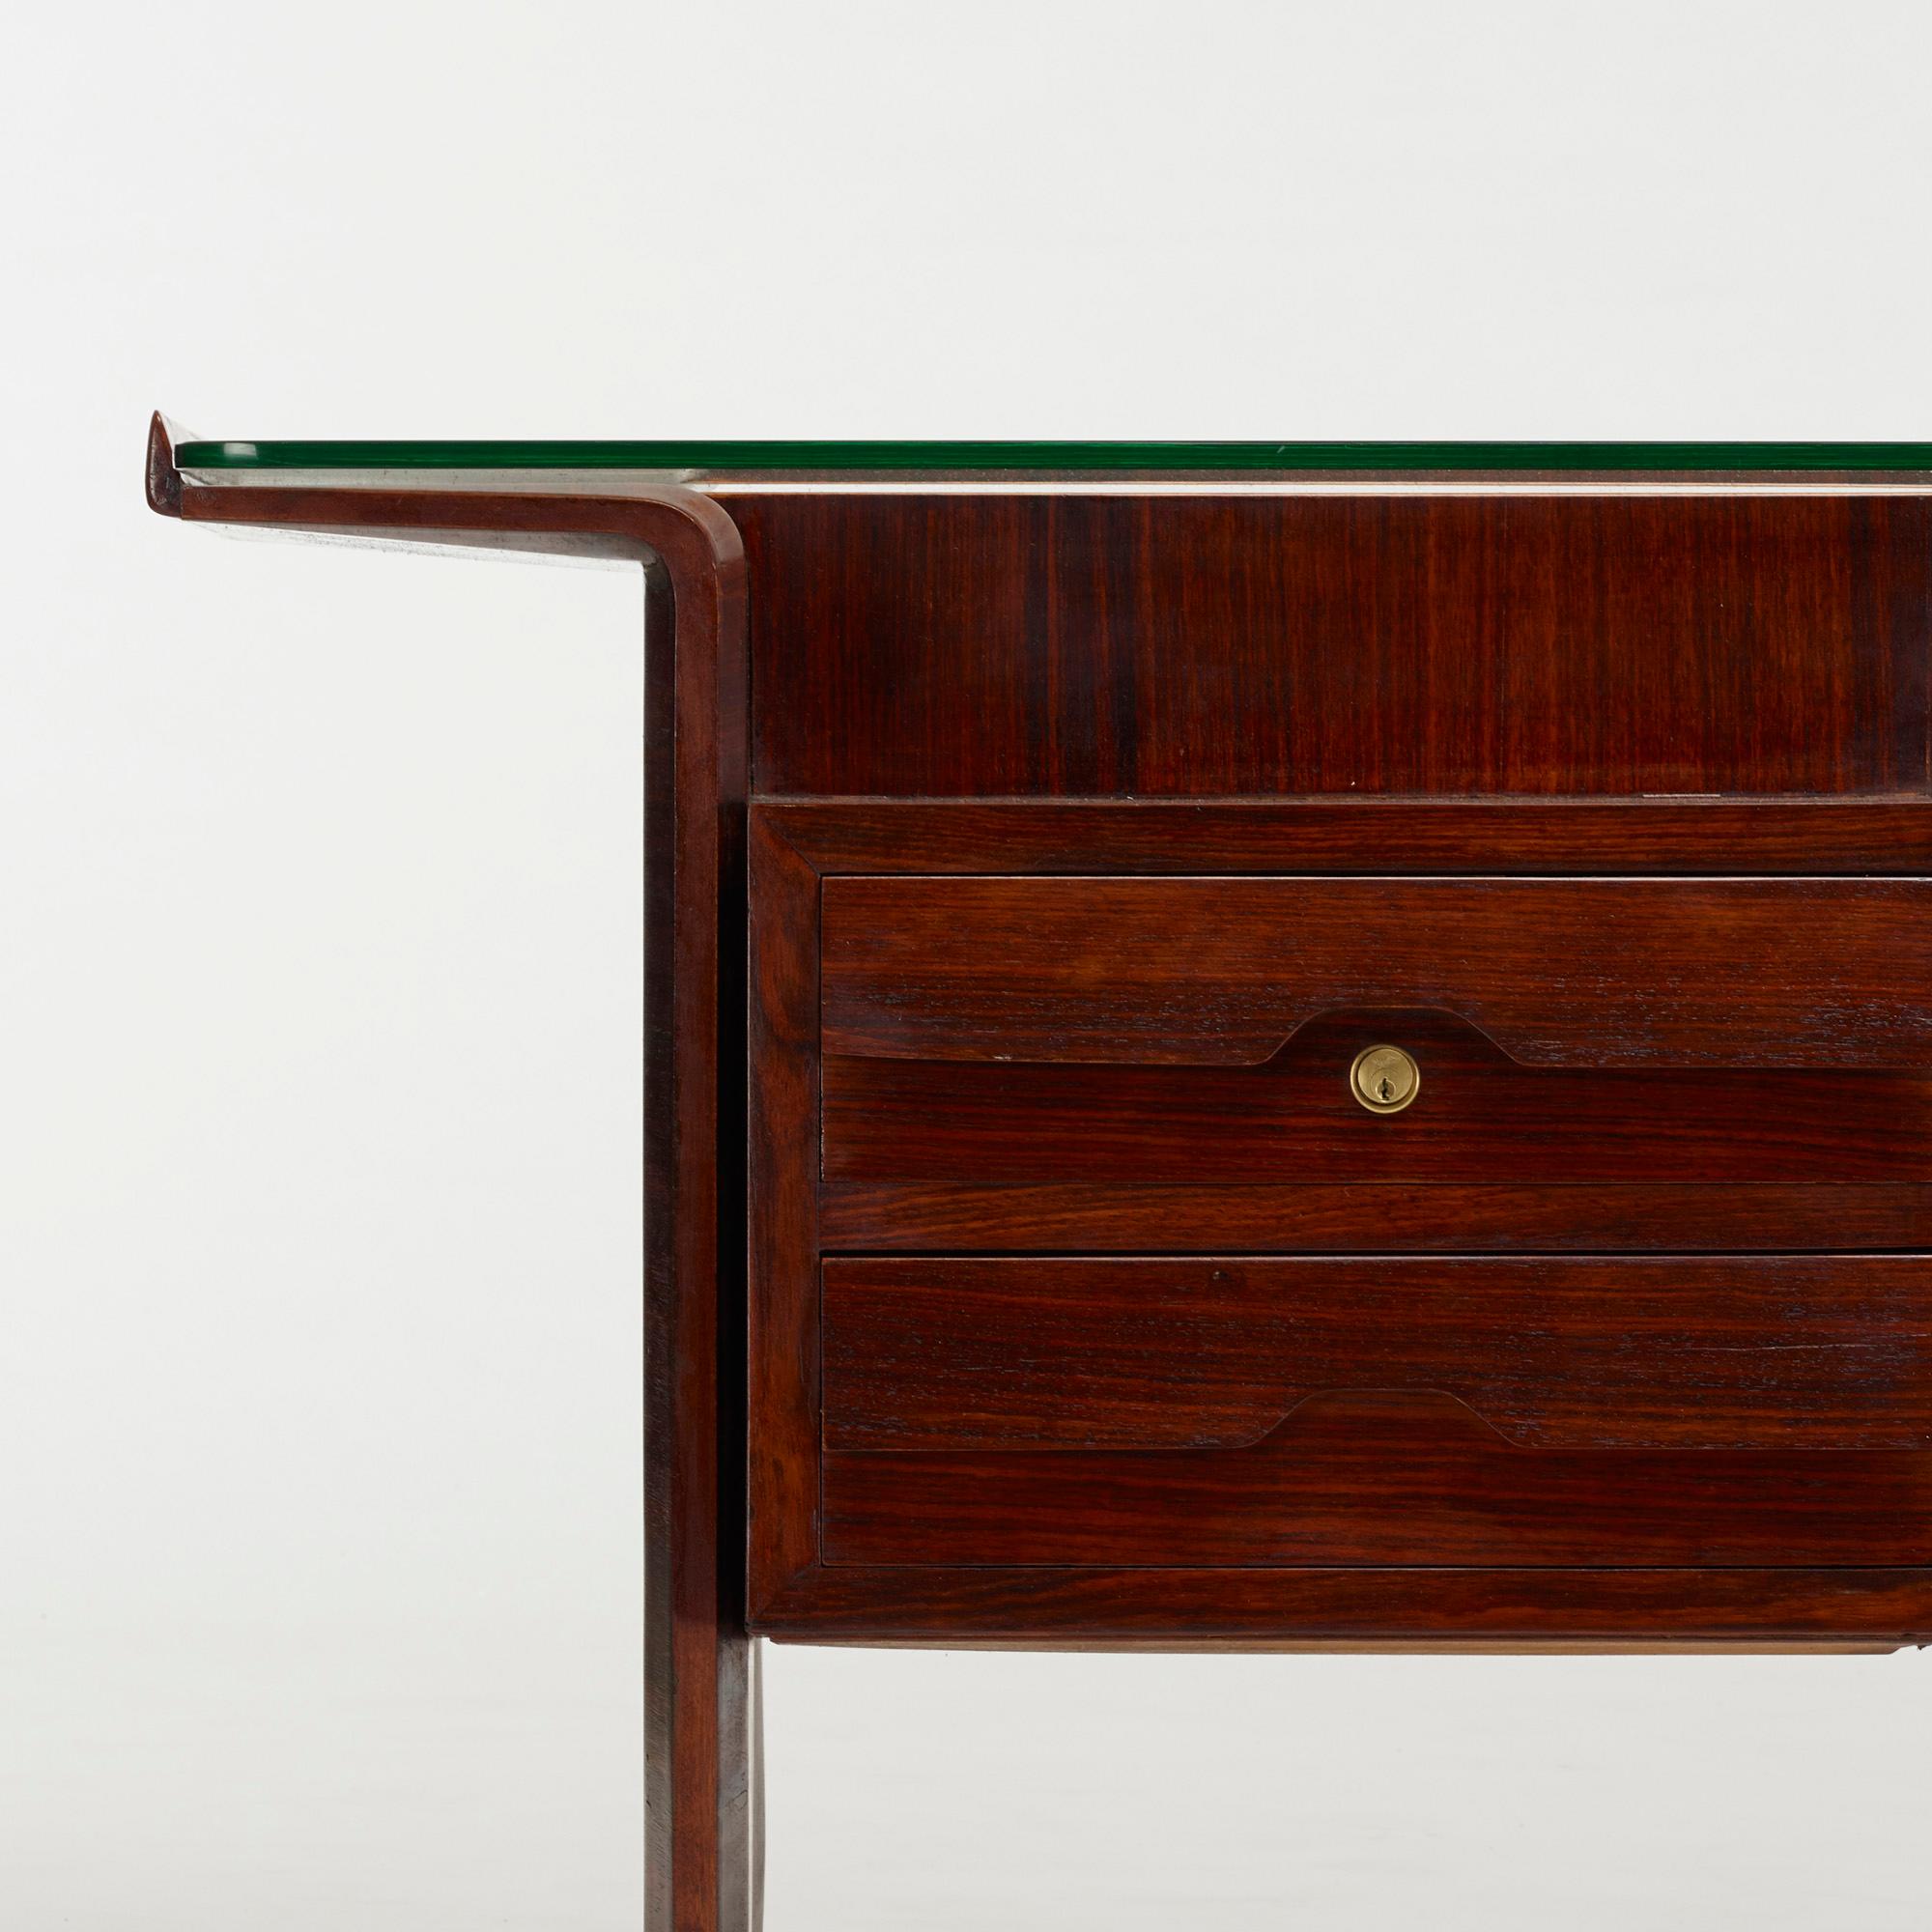 Mid-20th Century Important Desk by Gio Ponti for the offices of Fontana Arte.